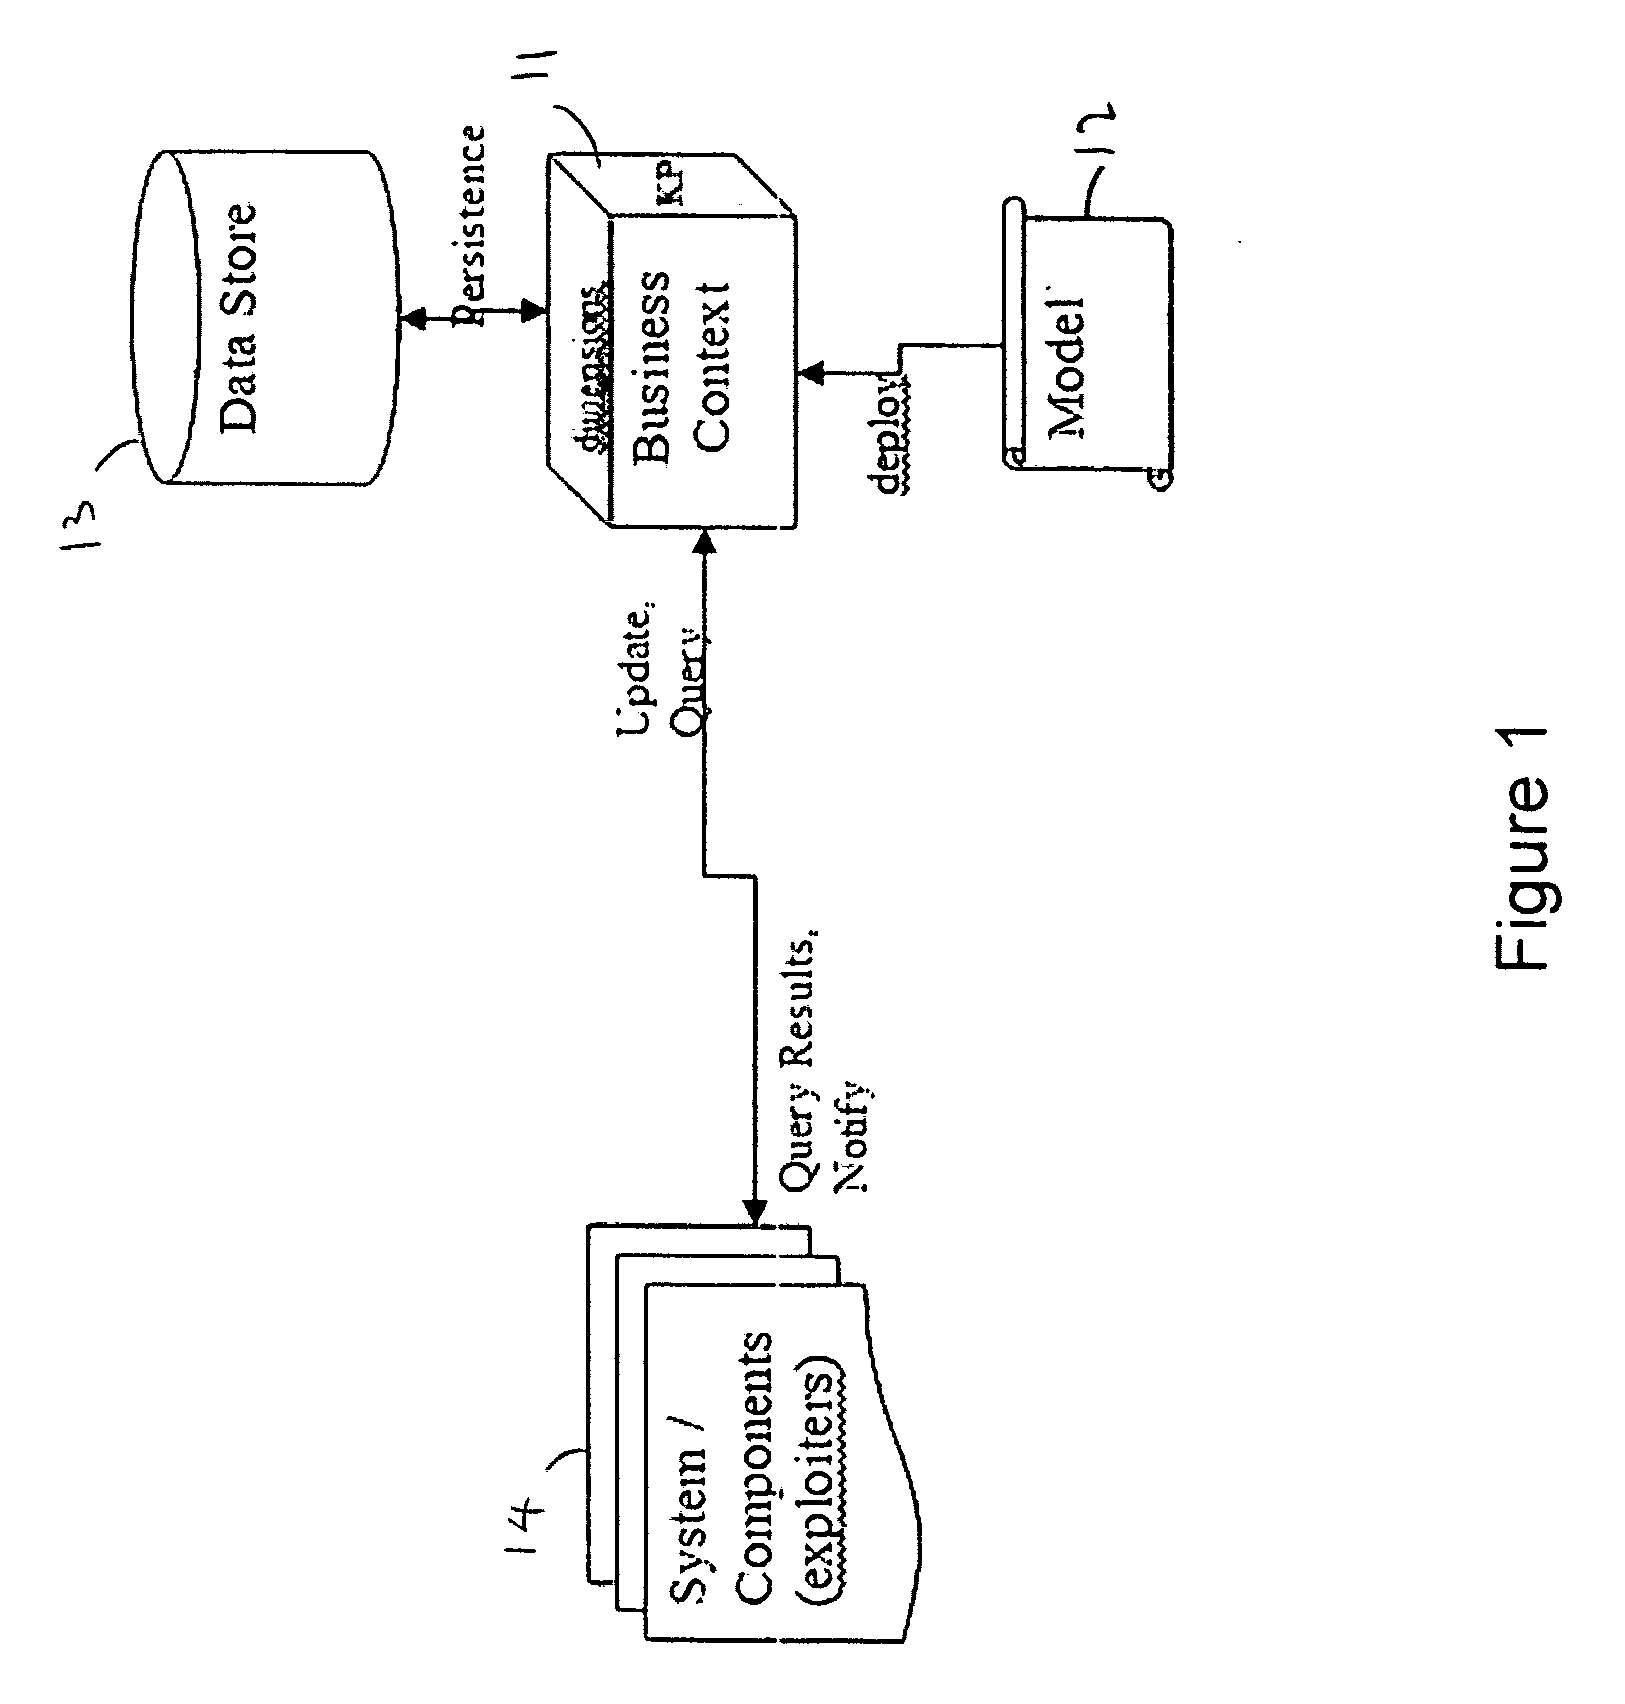 Apparatus and method of hosting on-demand business context information